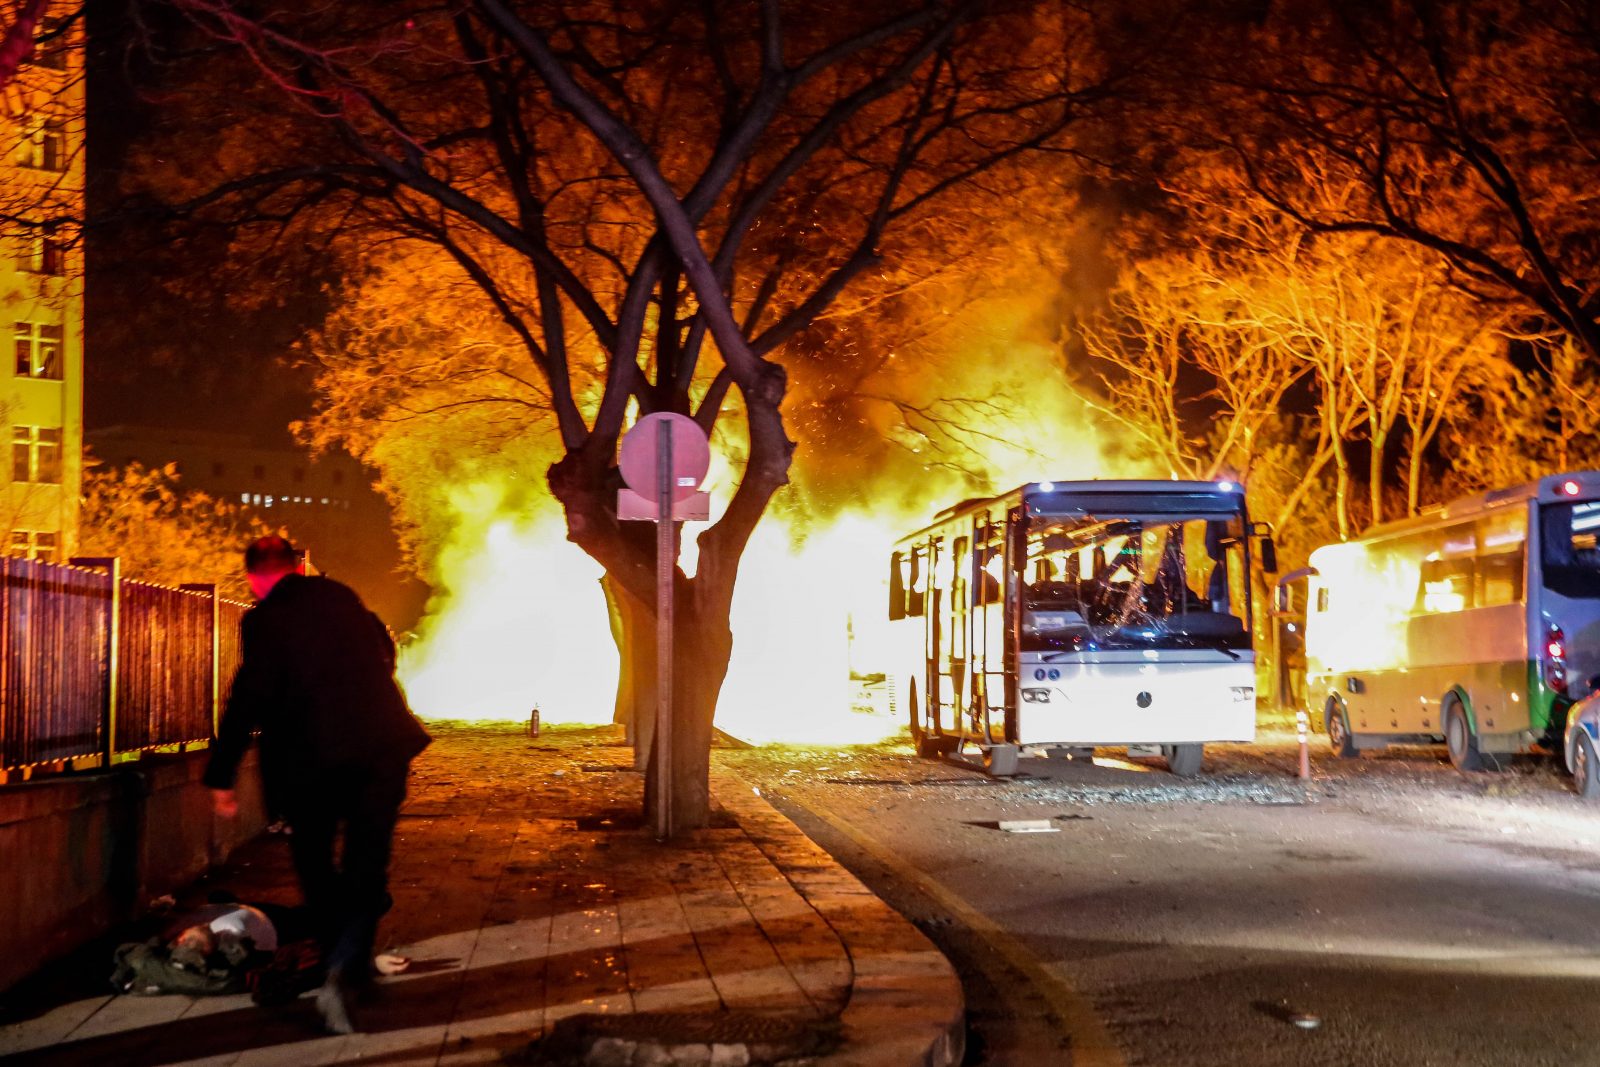 busses burning on street after explosion